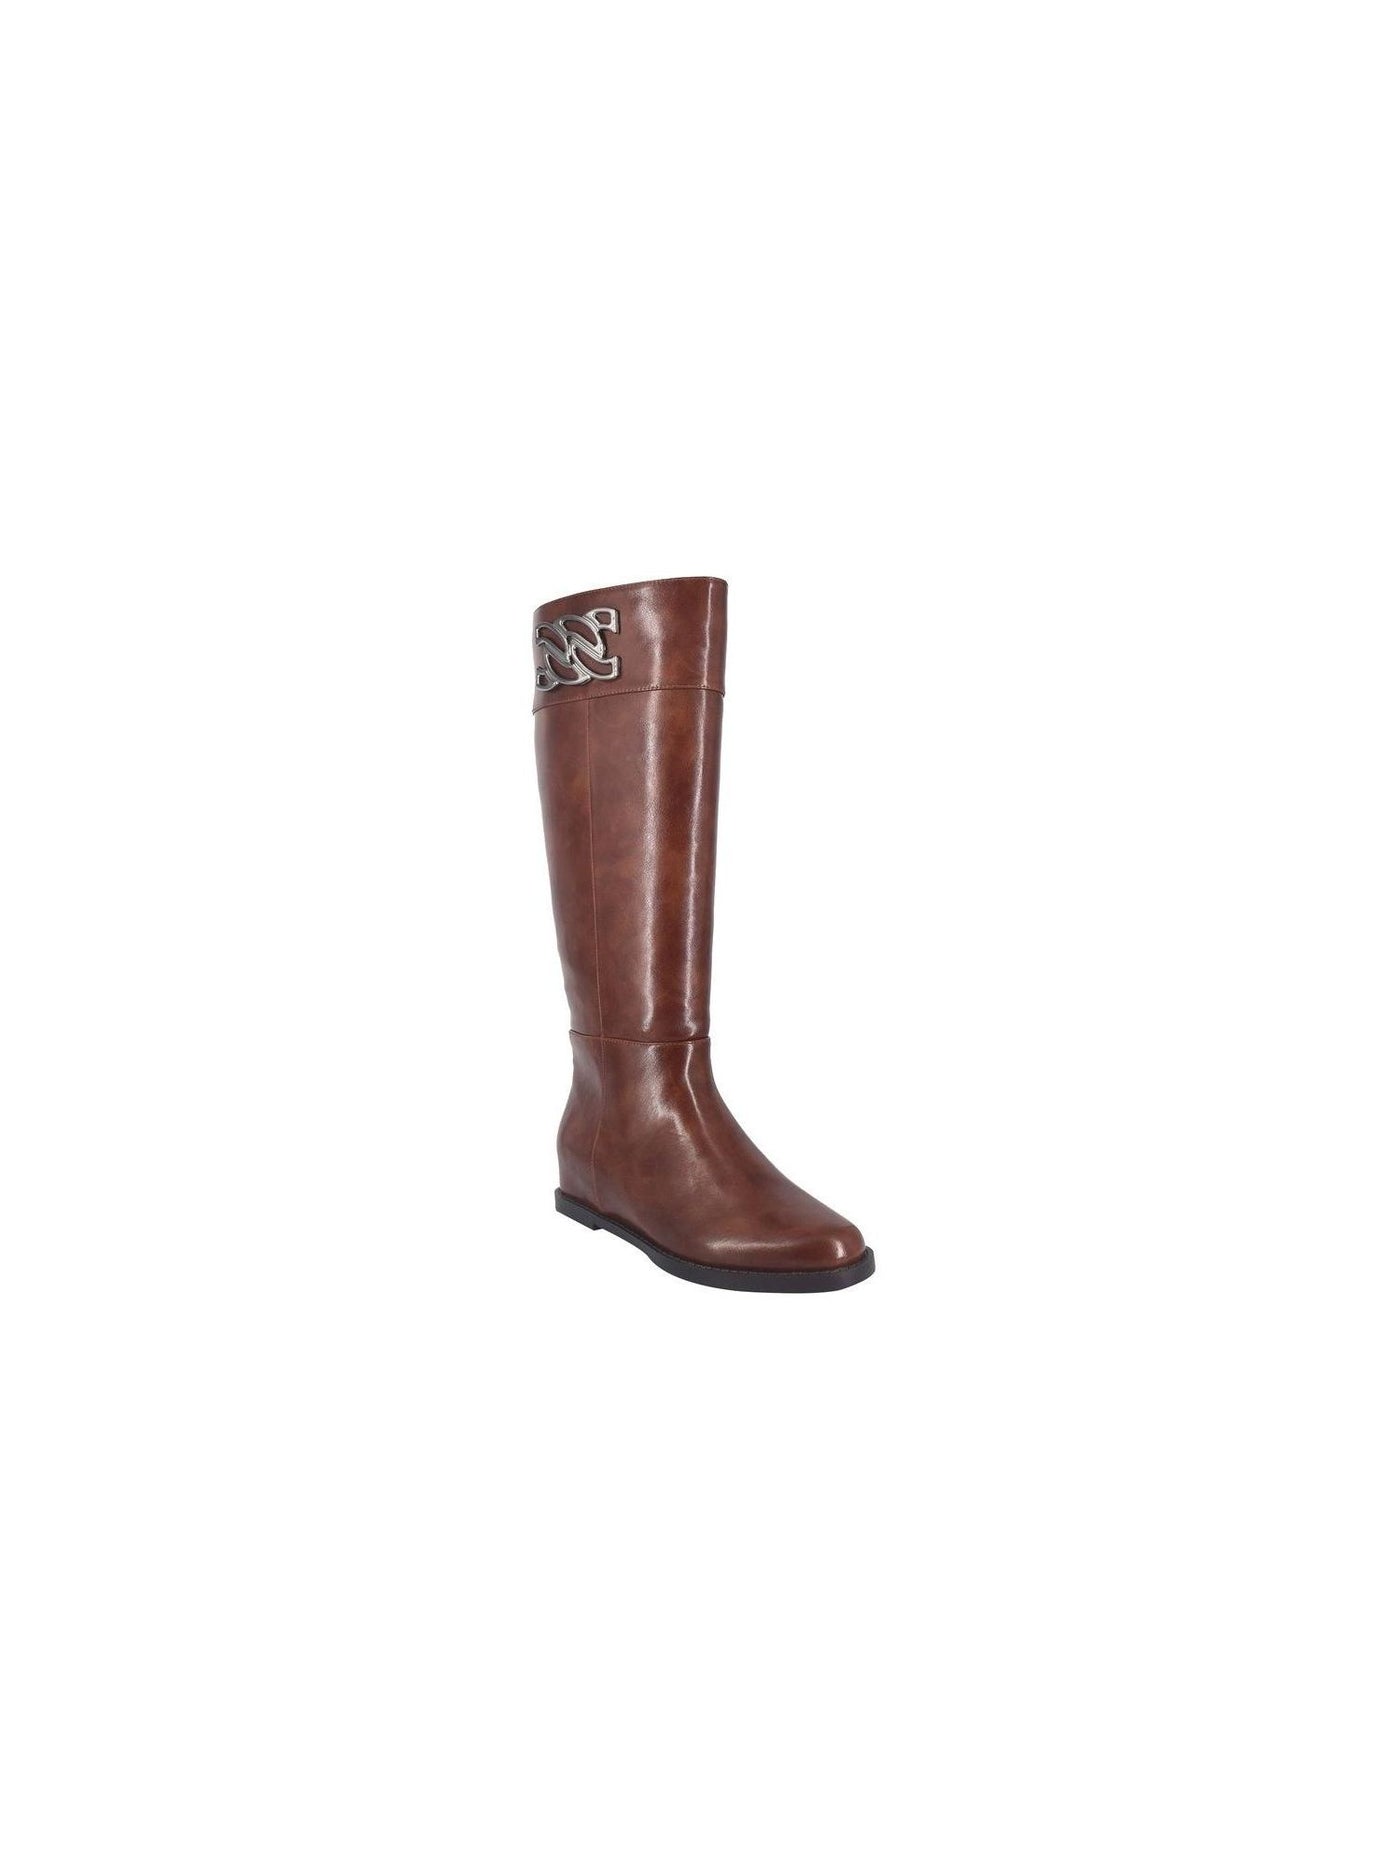 IMPO Womens Brown Cushioned Reiley Round Toe Zip-Up Riding Boot 8 M